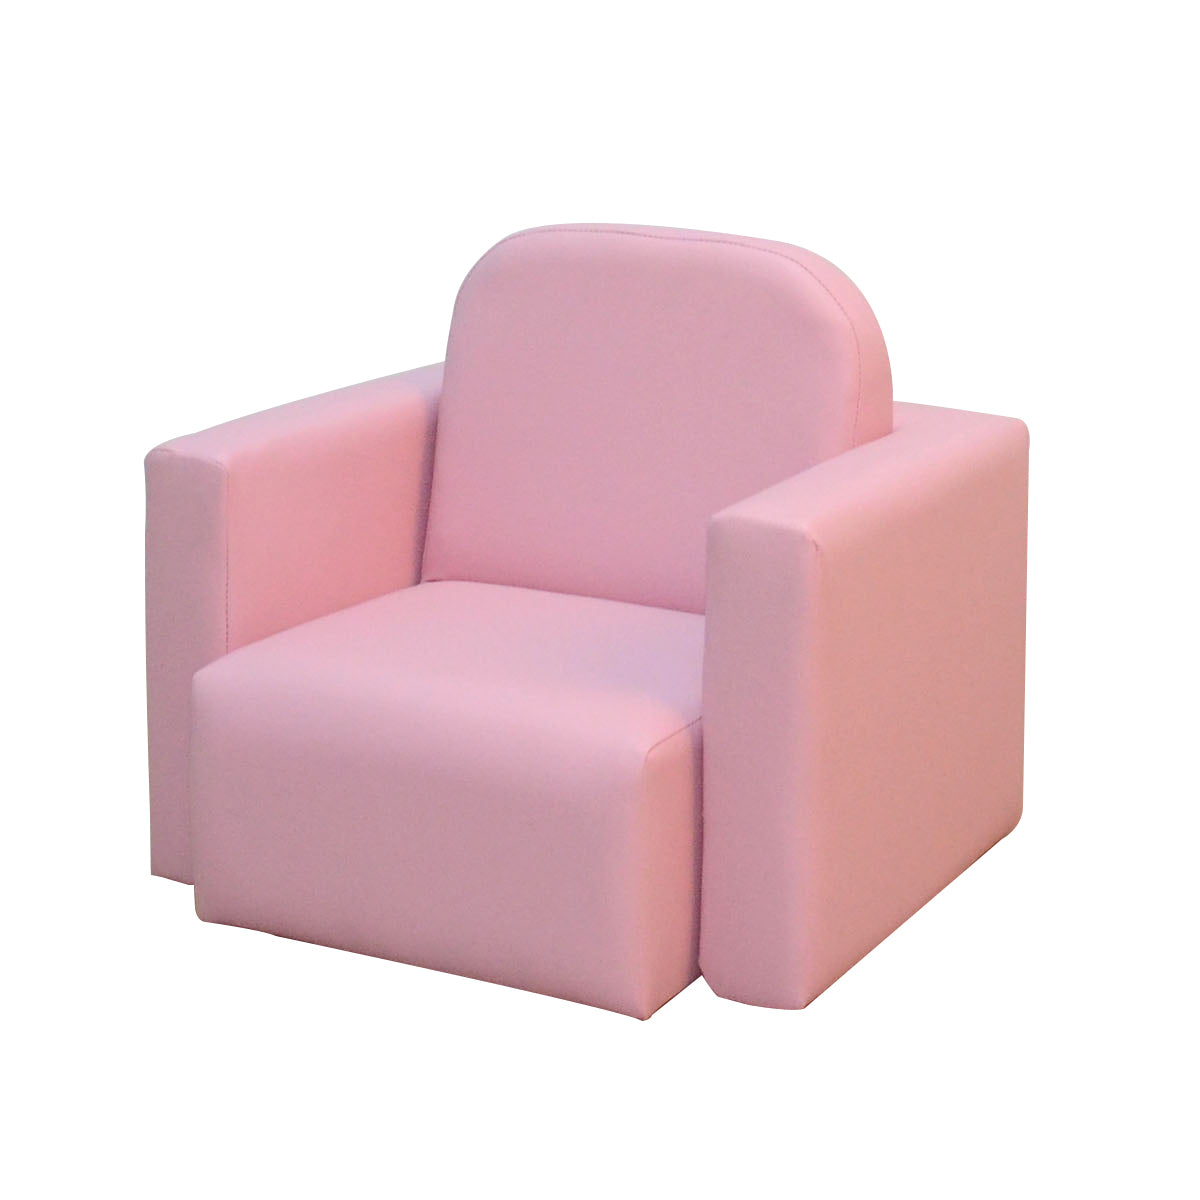 2 in 1 Multifunctional Kids Sofa Convertible Table and pink-pvc